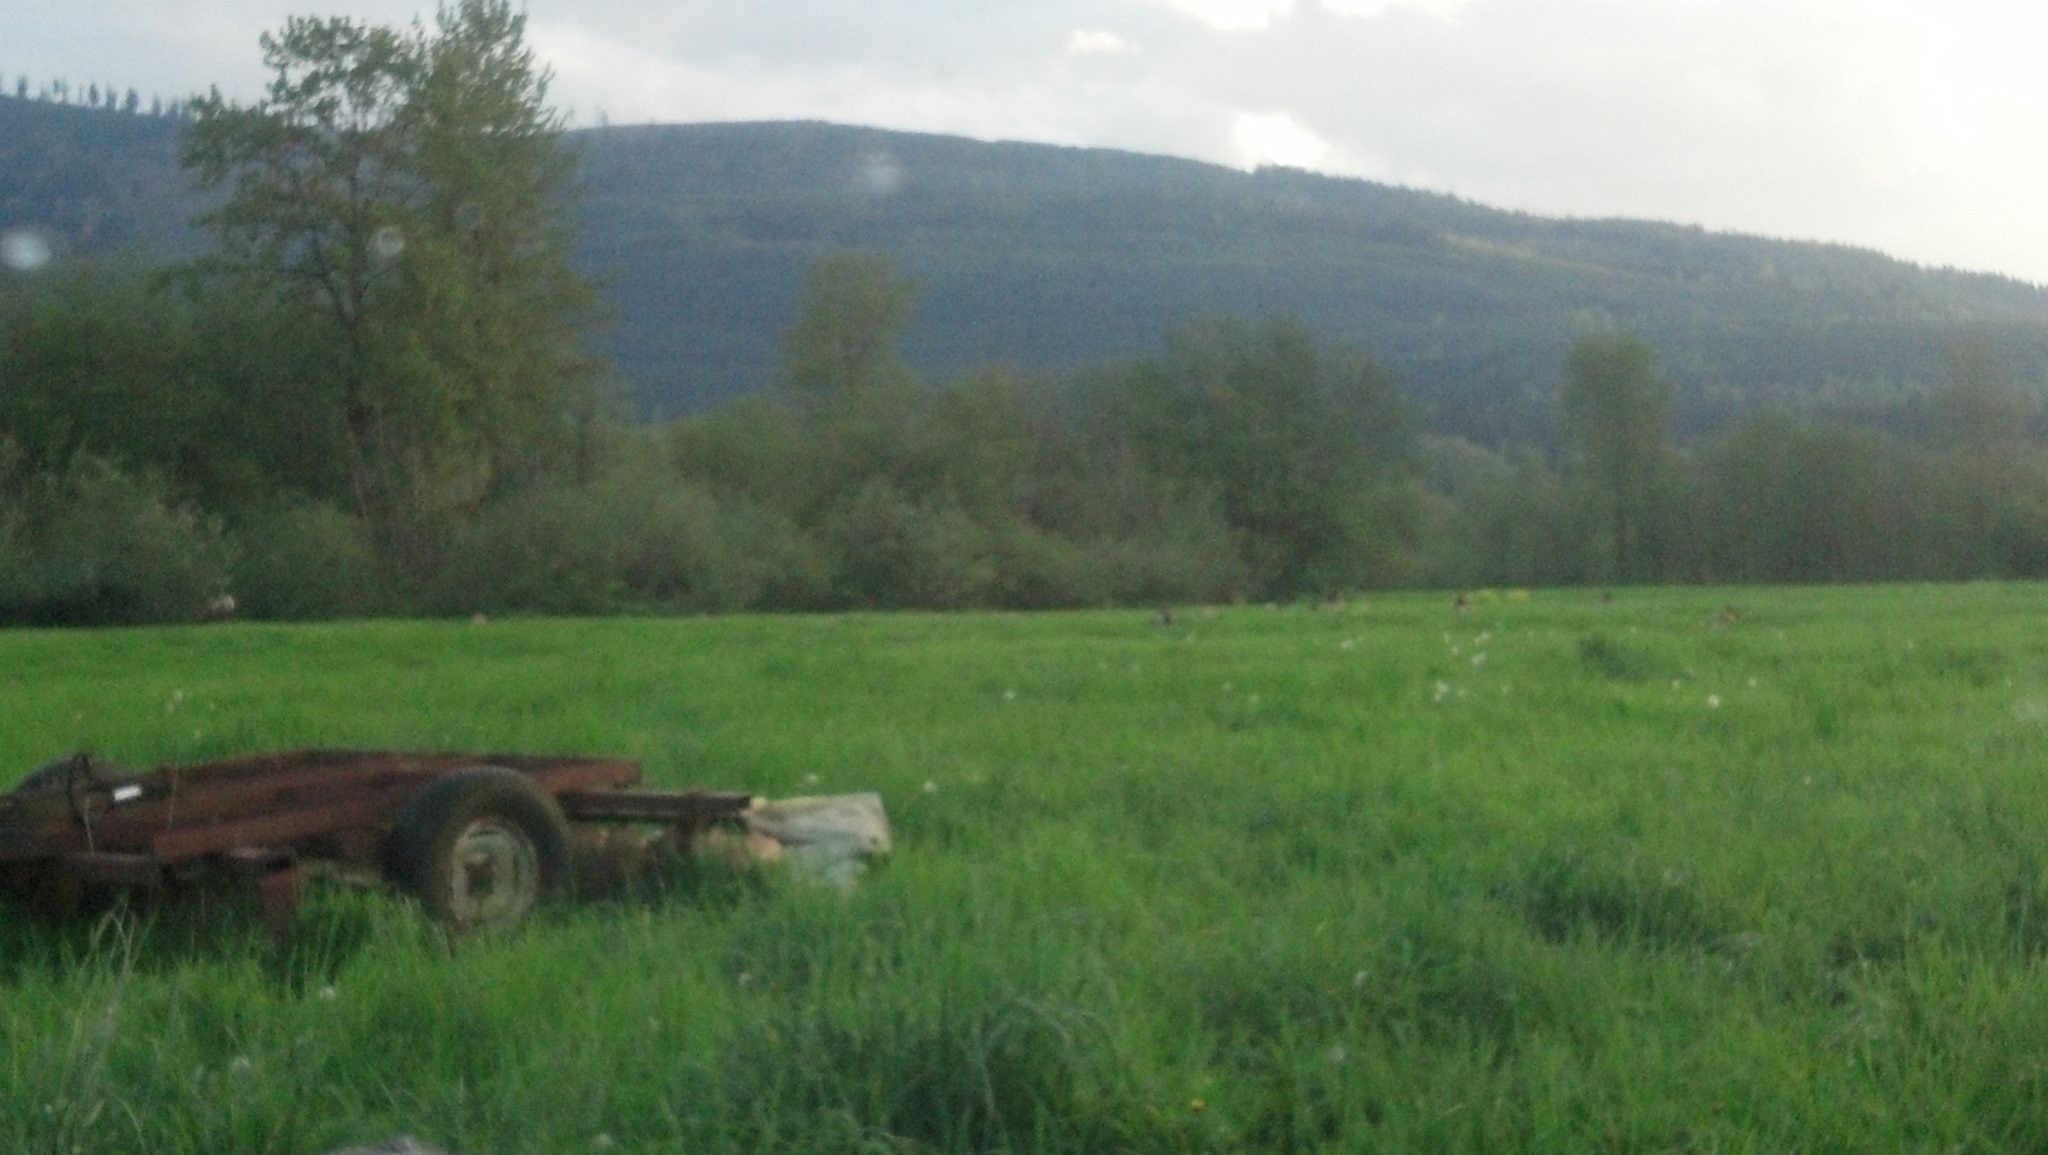 Stumbled upon a bunch of elk in a field by the schools and sport fields in Snoqualmie. Hard to see them, but they are all way out there in the field.